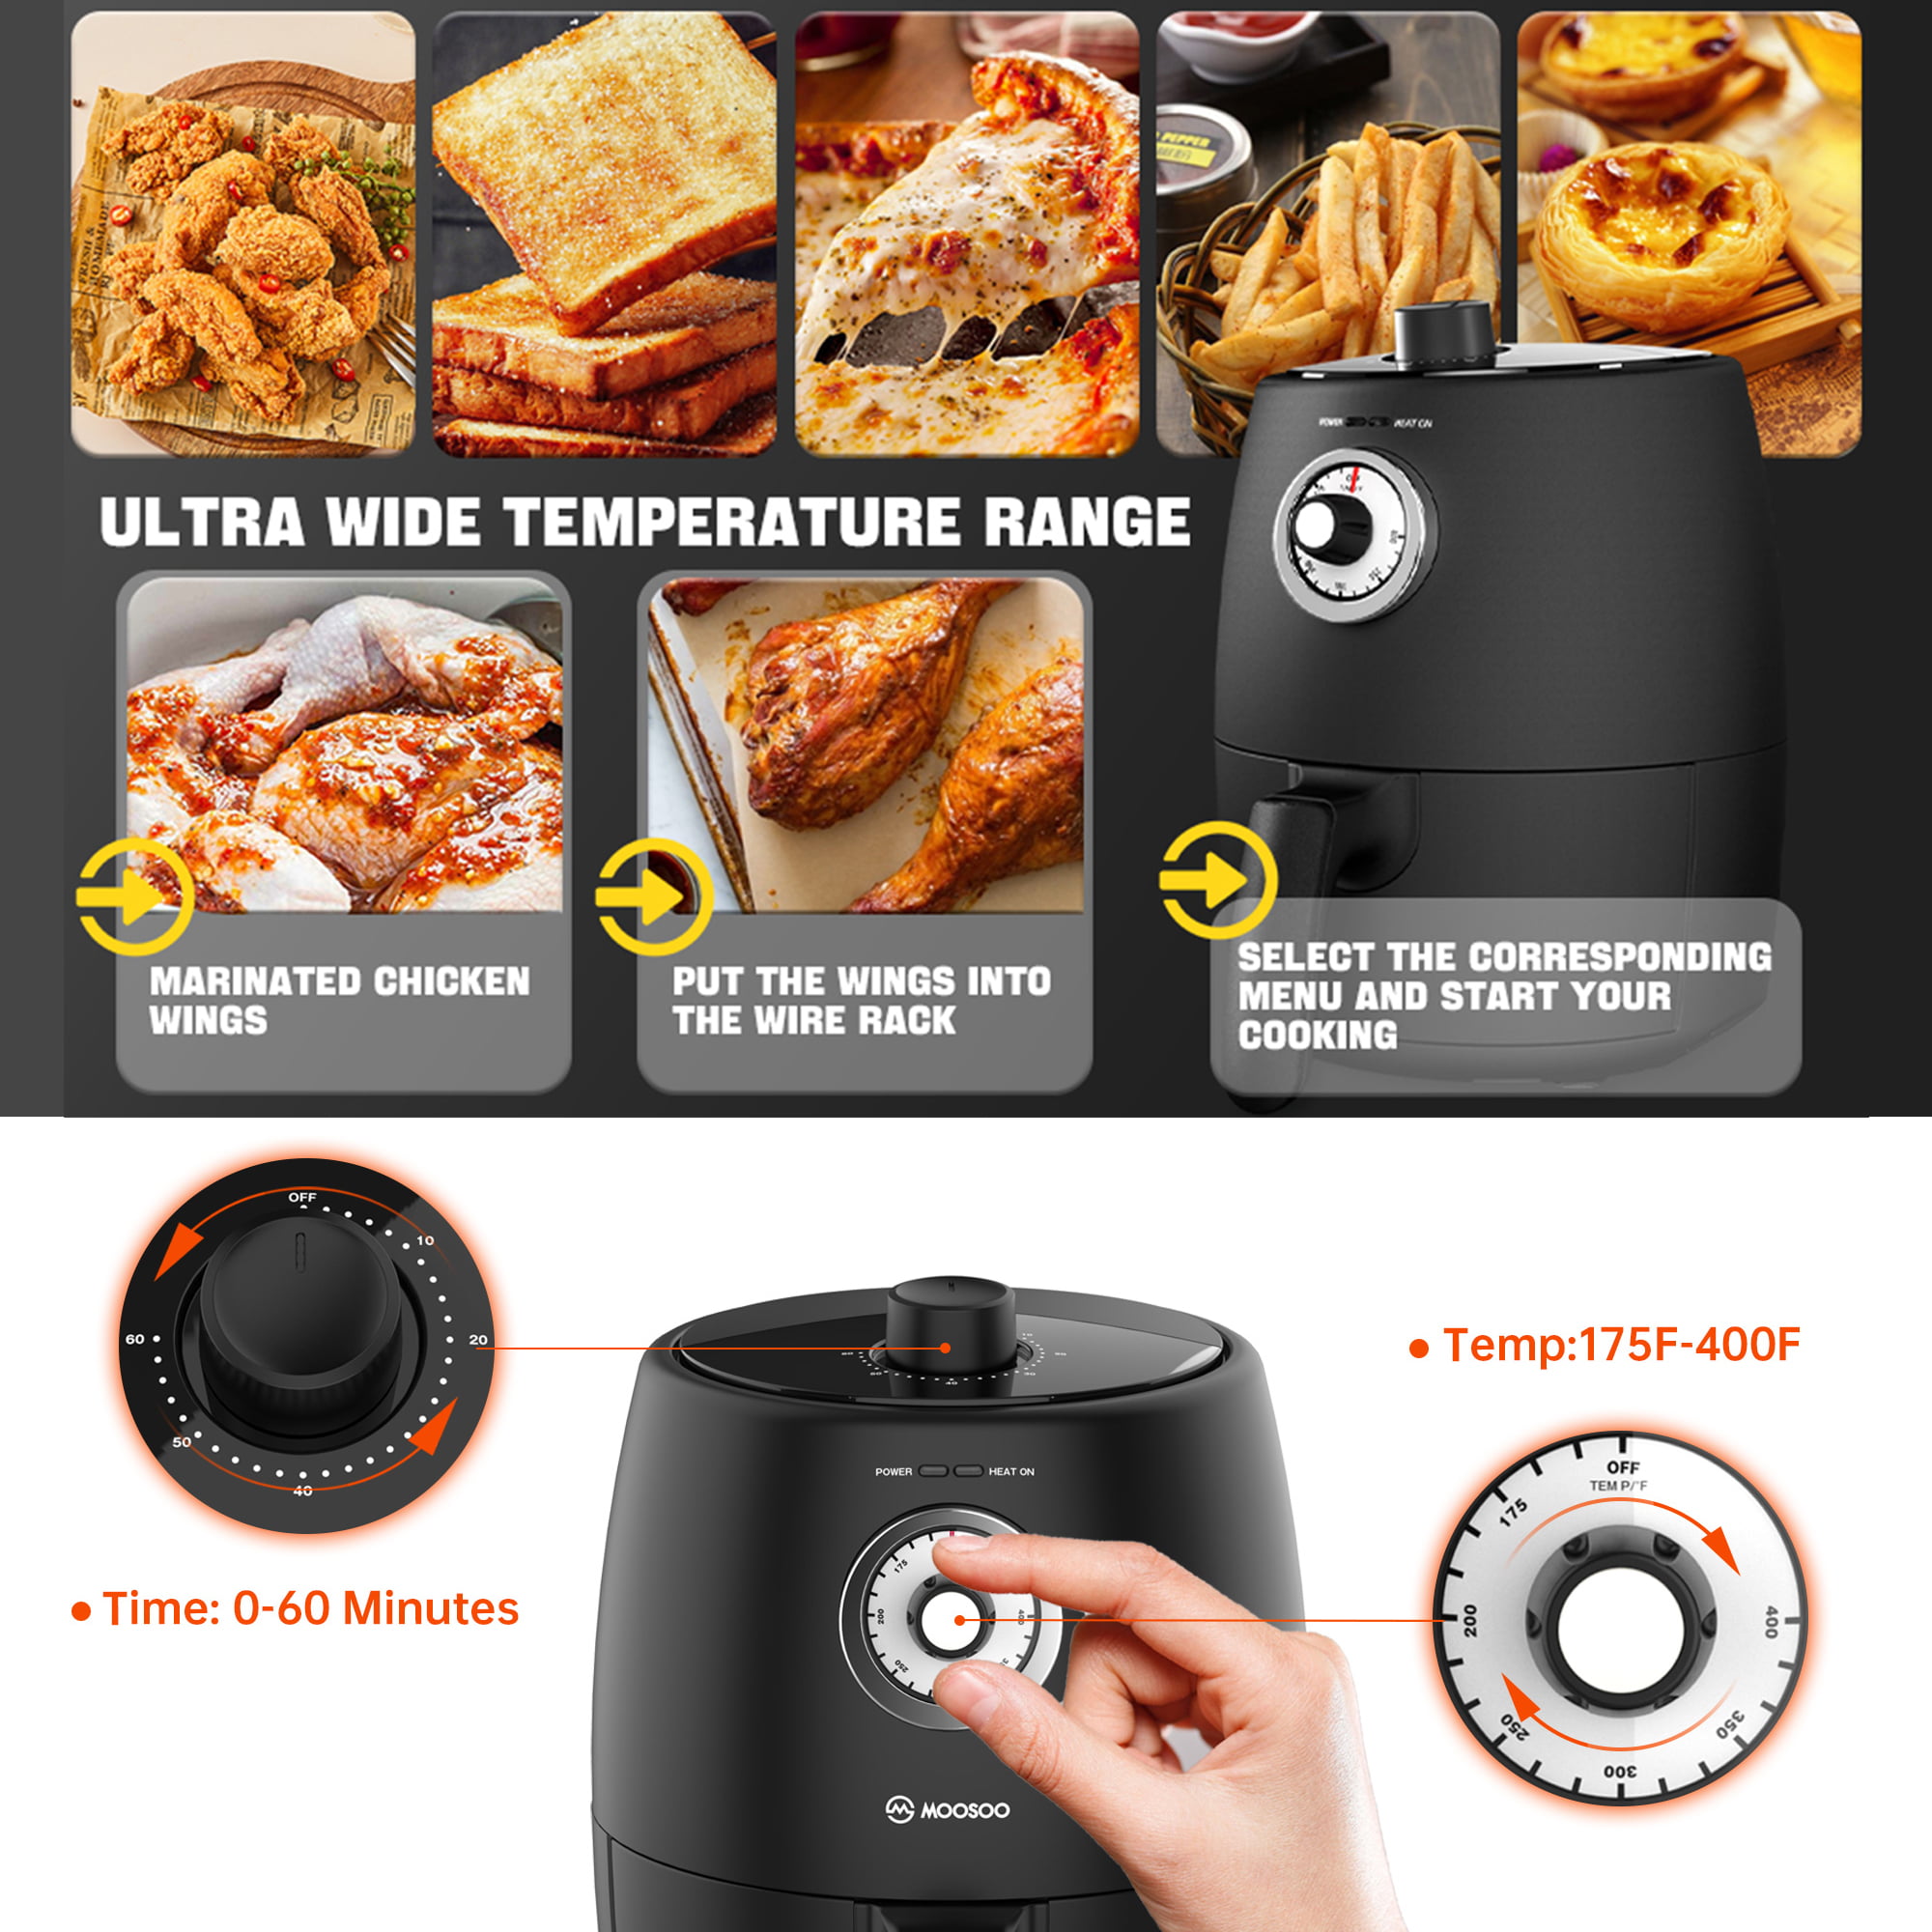 MOOSOO Small Air Fryer, 2 Quart Electric Oil-Less Air Fryer Oven Cooker with Air Fryer Liner, Cookbook - image 4 of 8